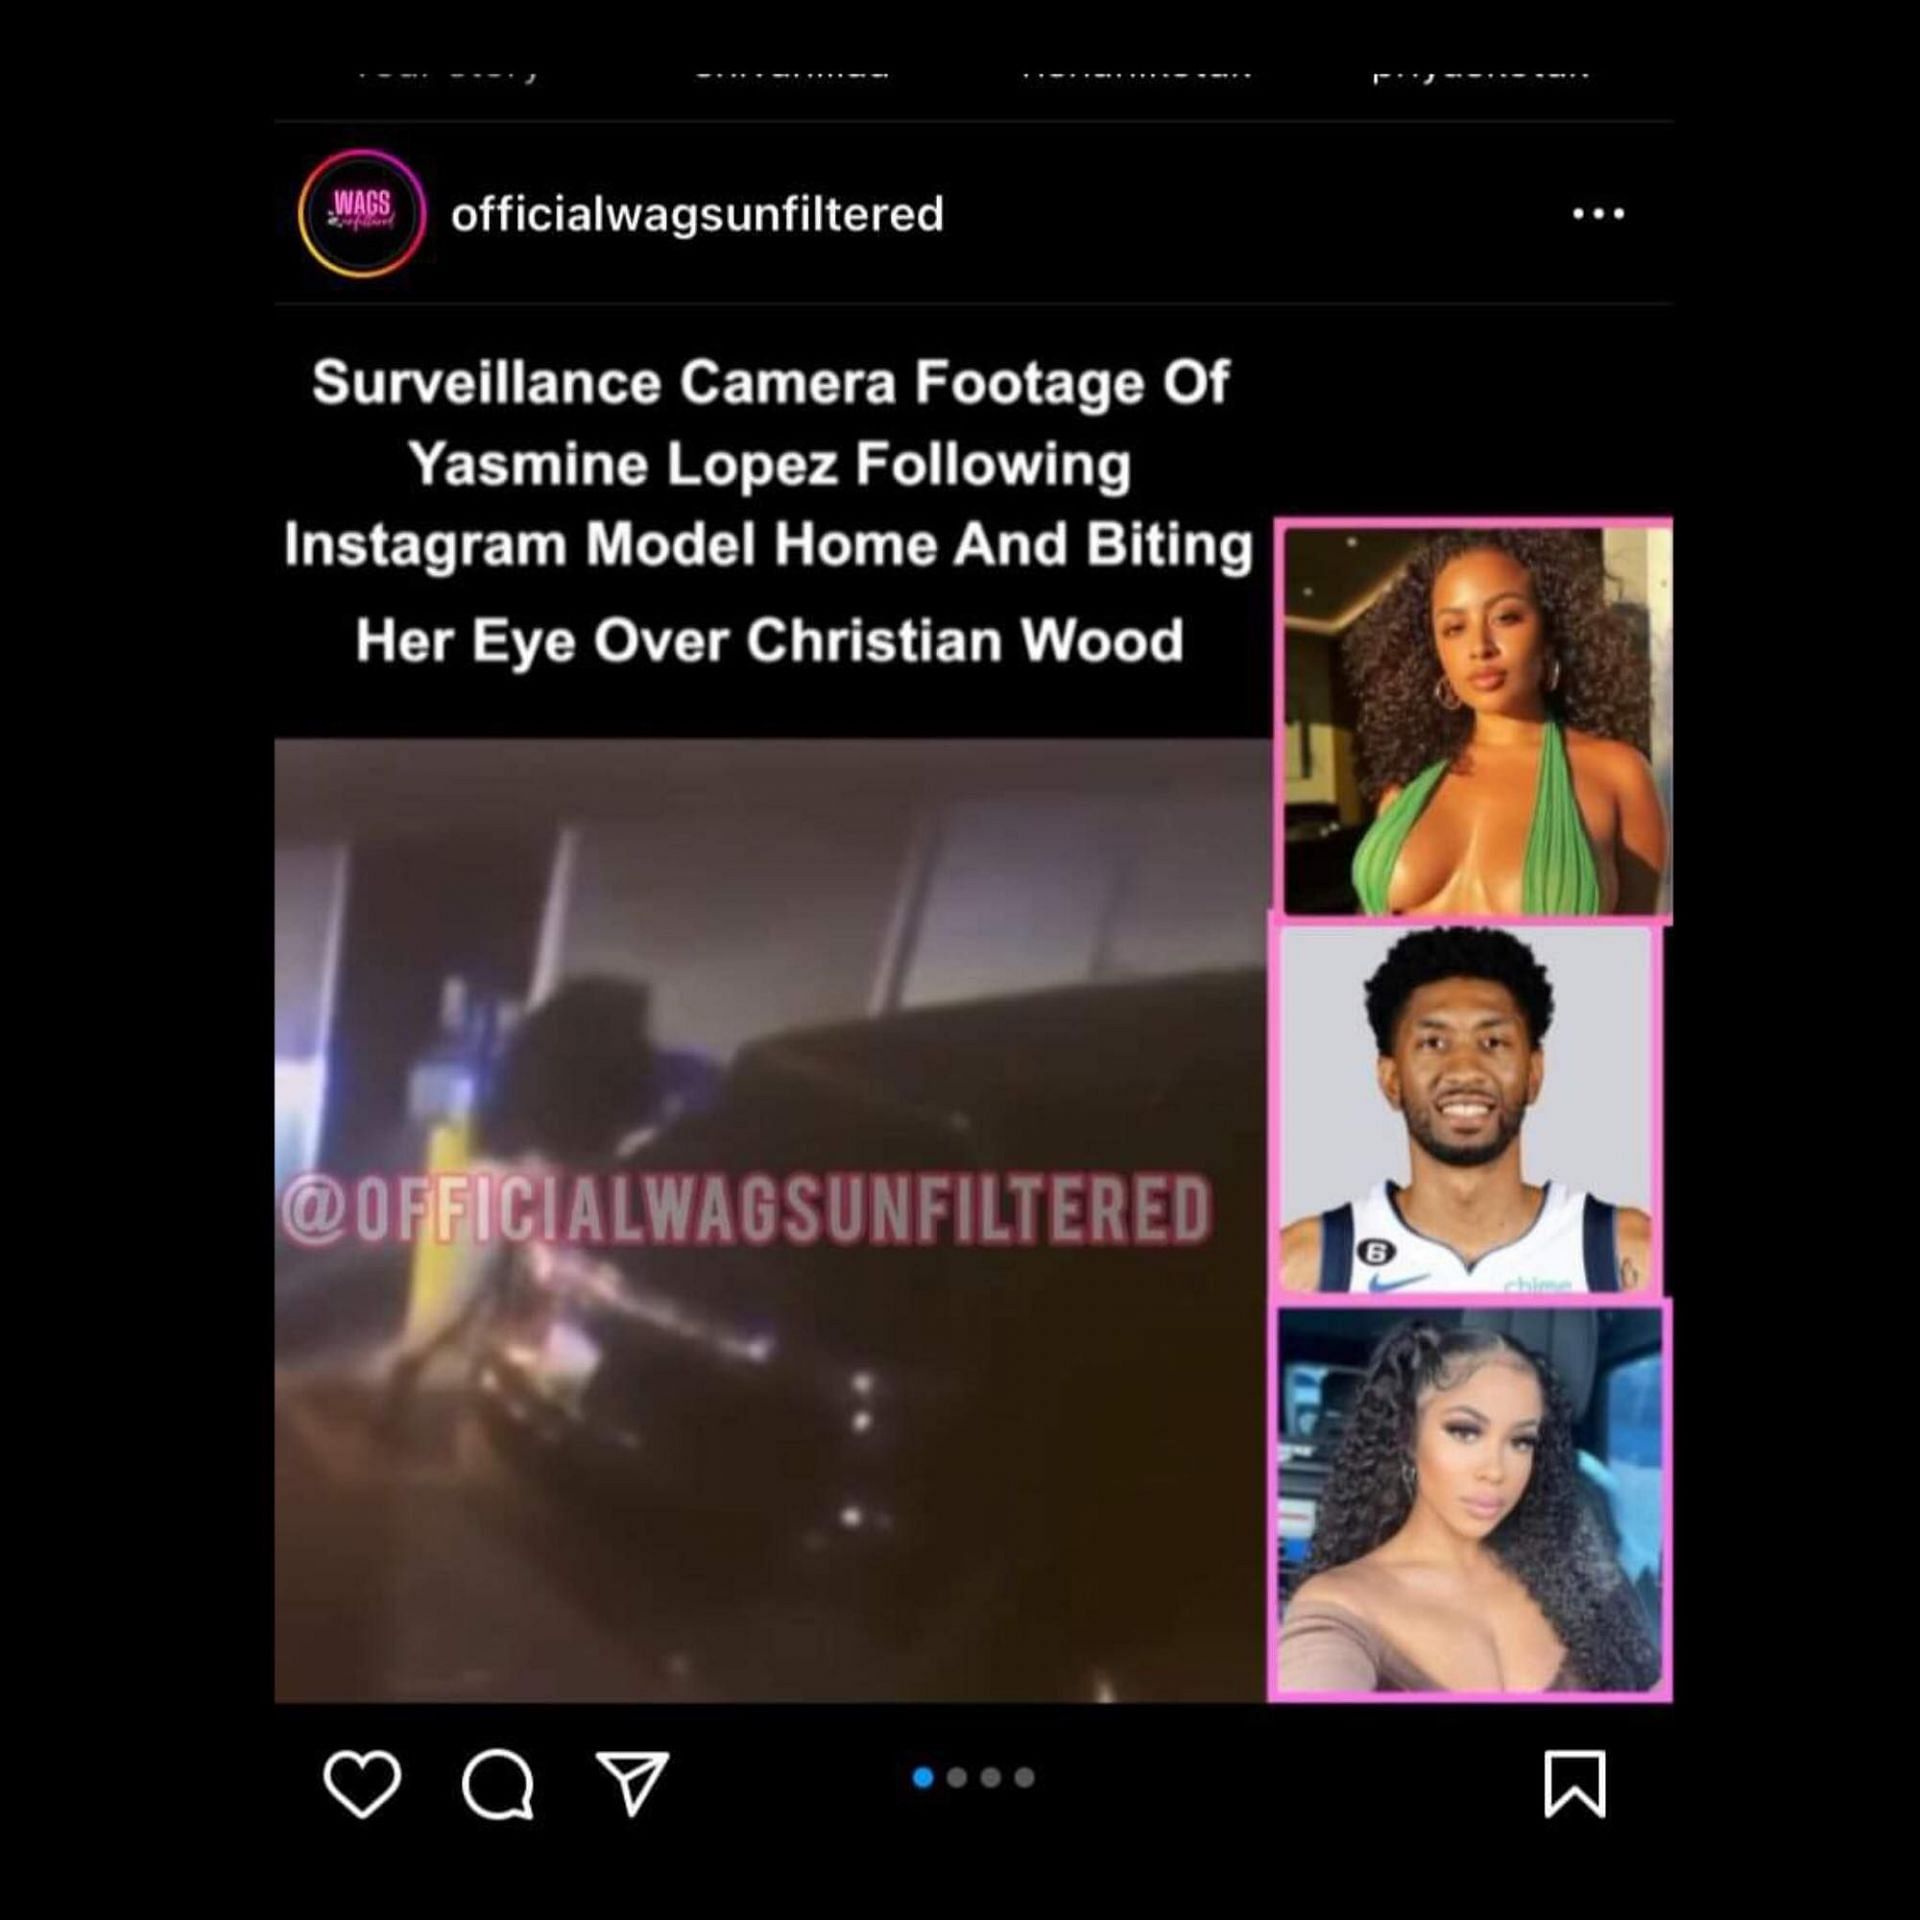 Instagram post #1 with a clip of the incident